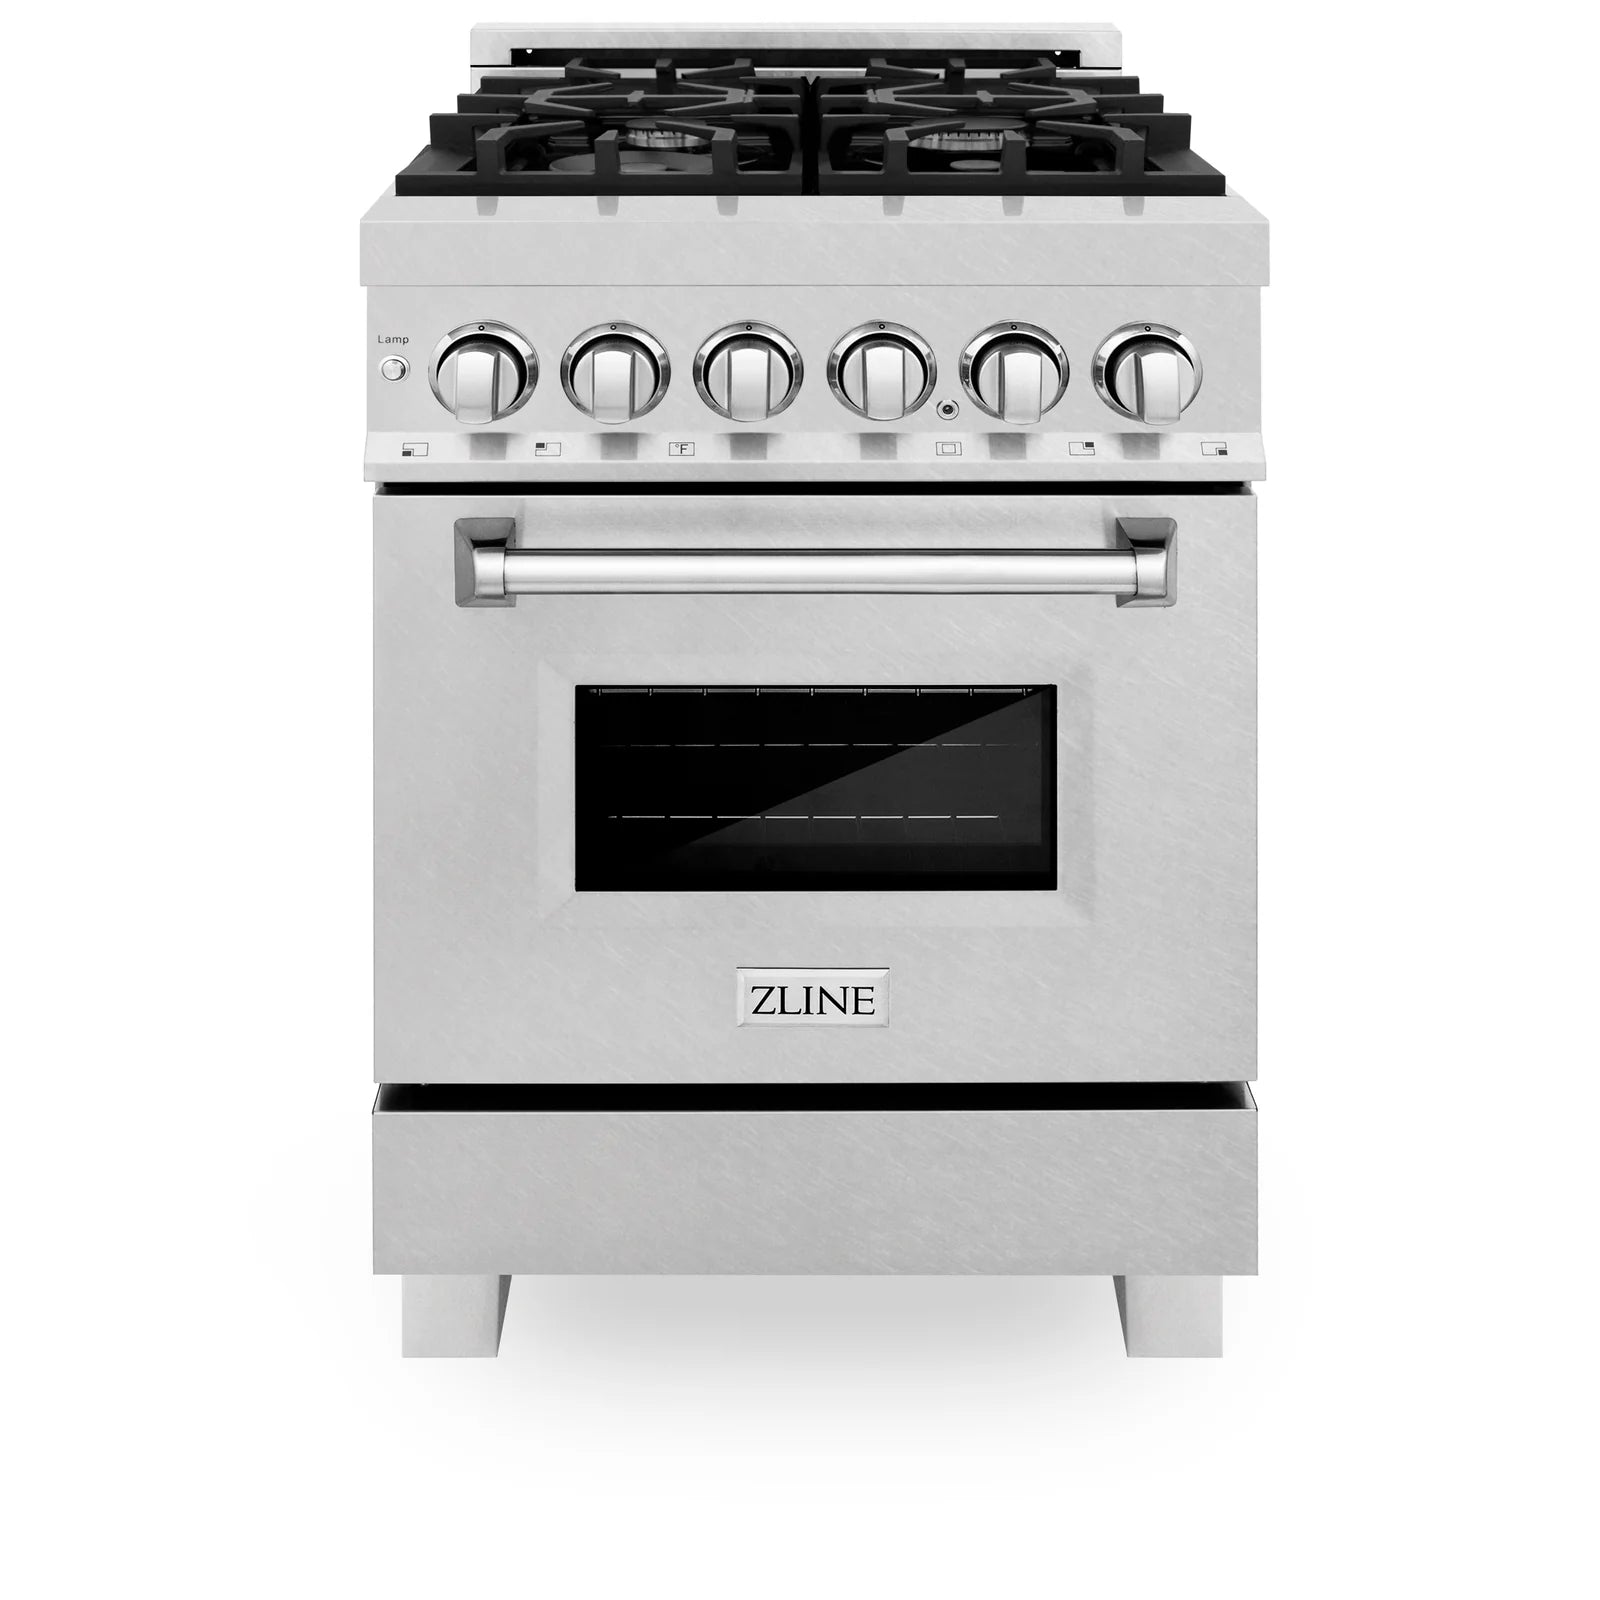 ZLINE 24-Inch 2.8 cu. ft. Electric Oven and Gas Cooktop Dual Fuel Range with Griddle in Fingerprint Resistant Stainless - RAS-SN-GR-24